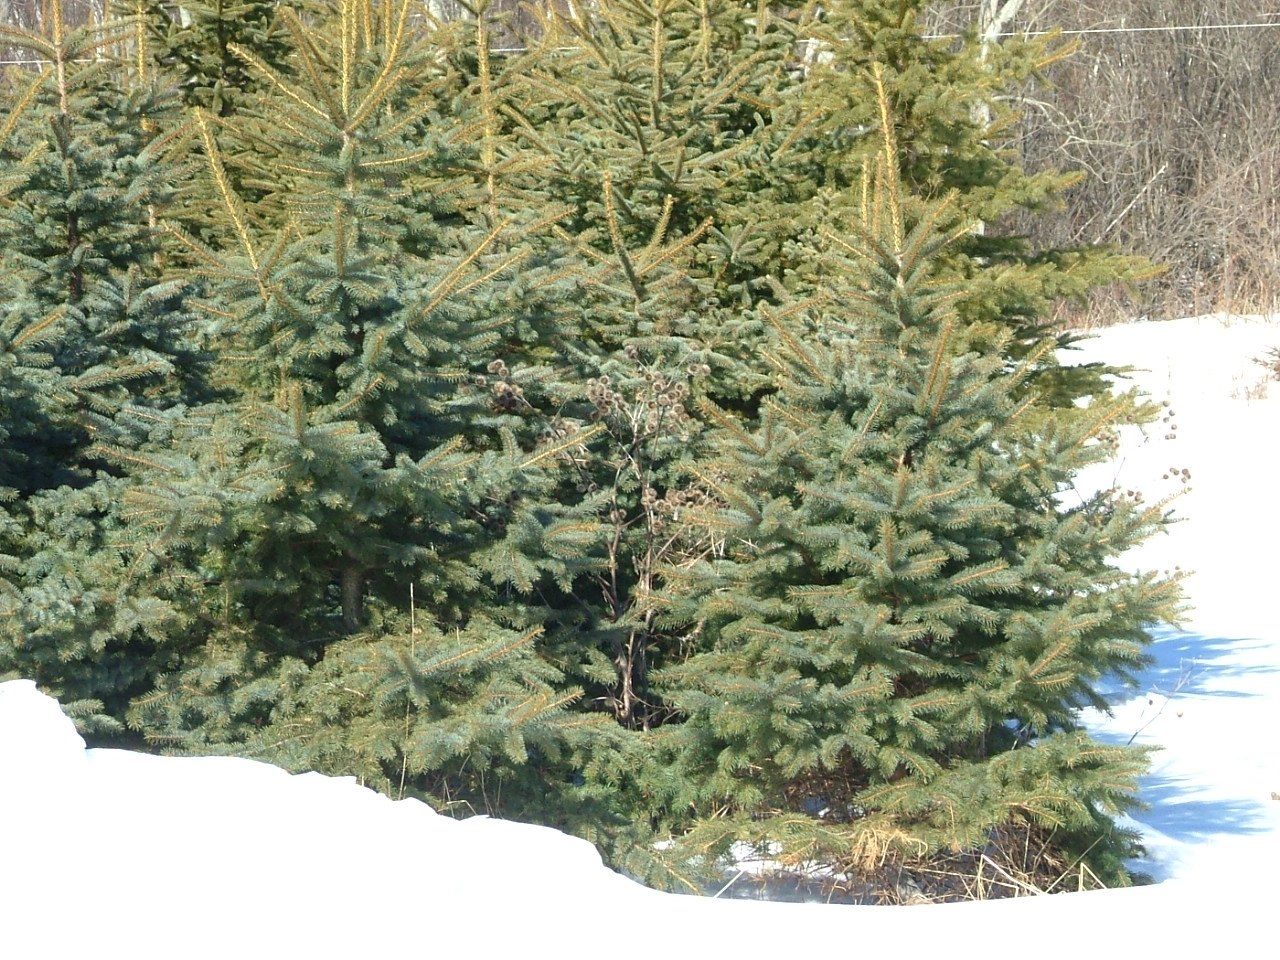 Blue Spruce trees